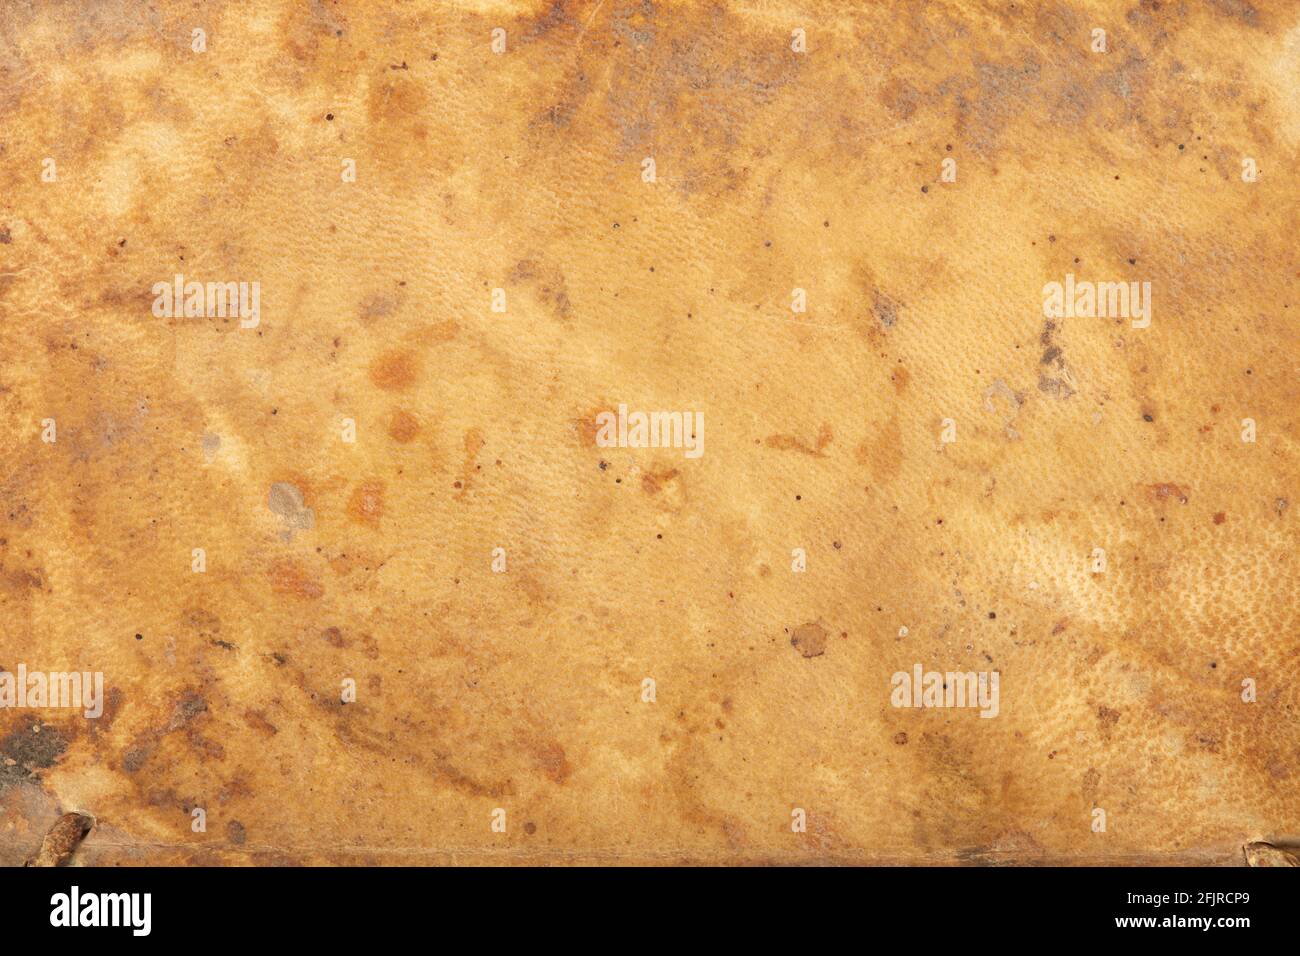 Old, stained leather parchment texture background Stock Photo